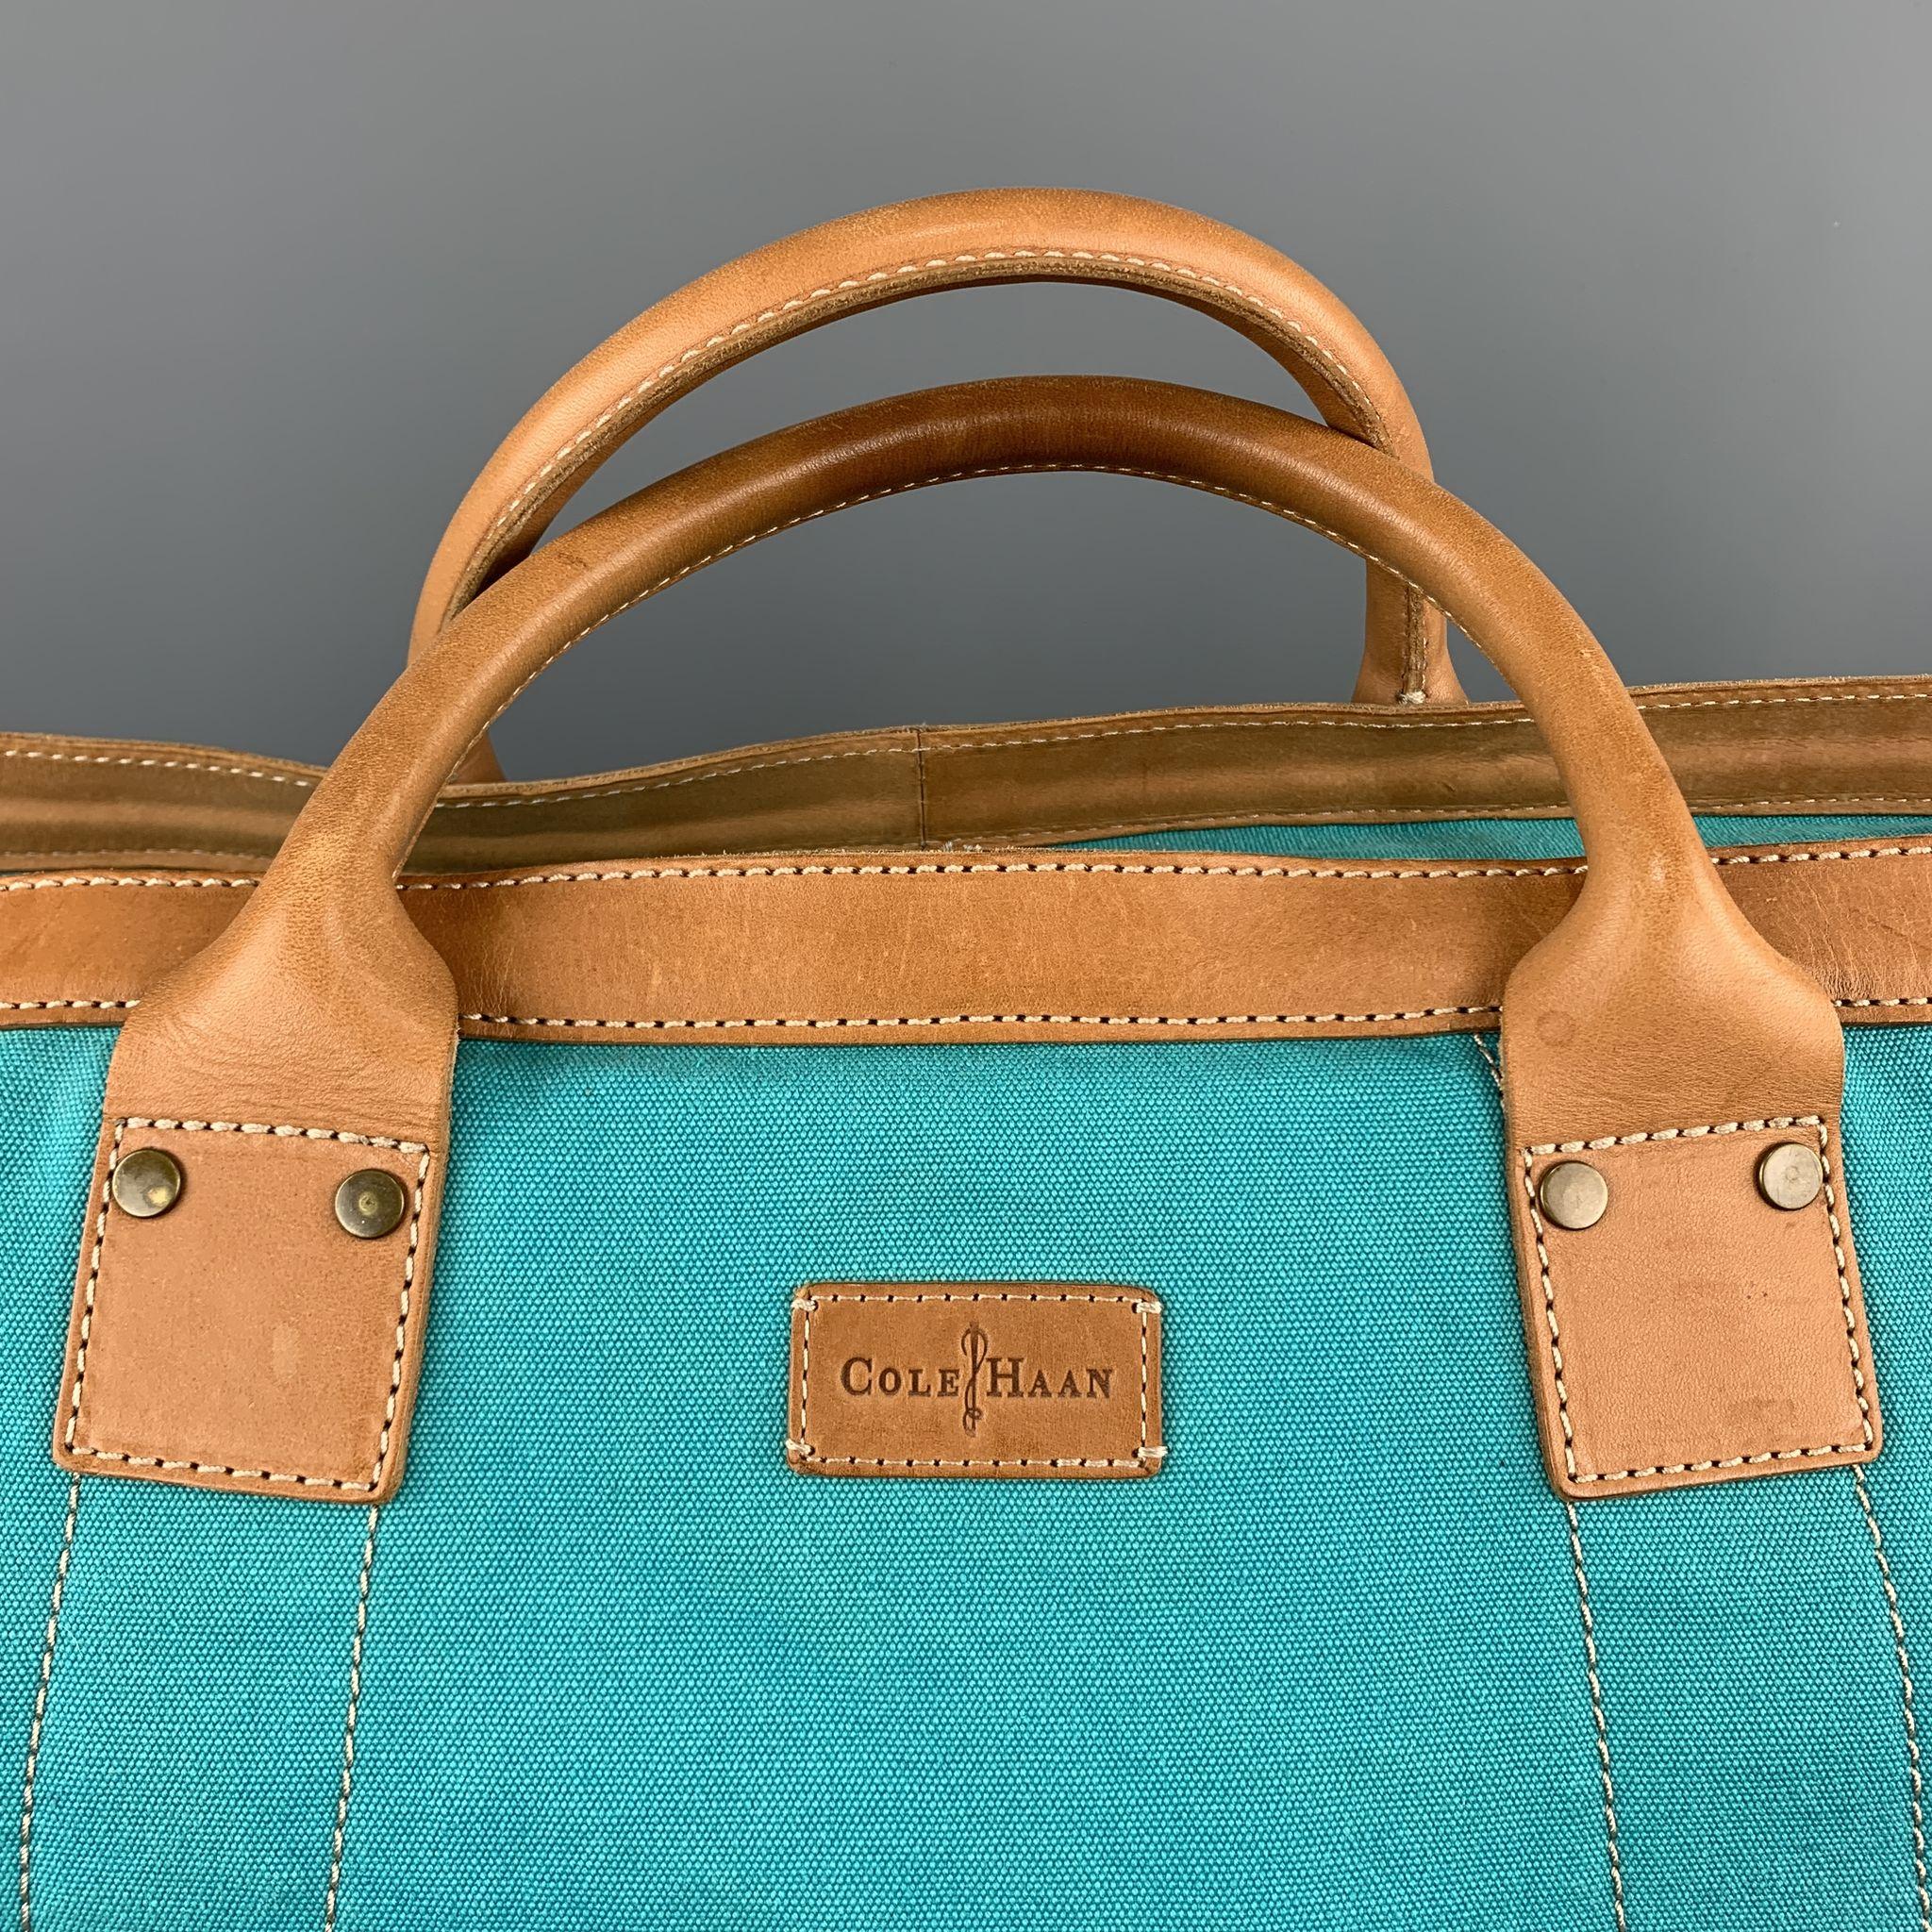 COLE HAAN Aqua & Navy Canvas Leather Two Tone Tote Bag 4